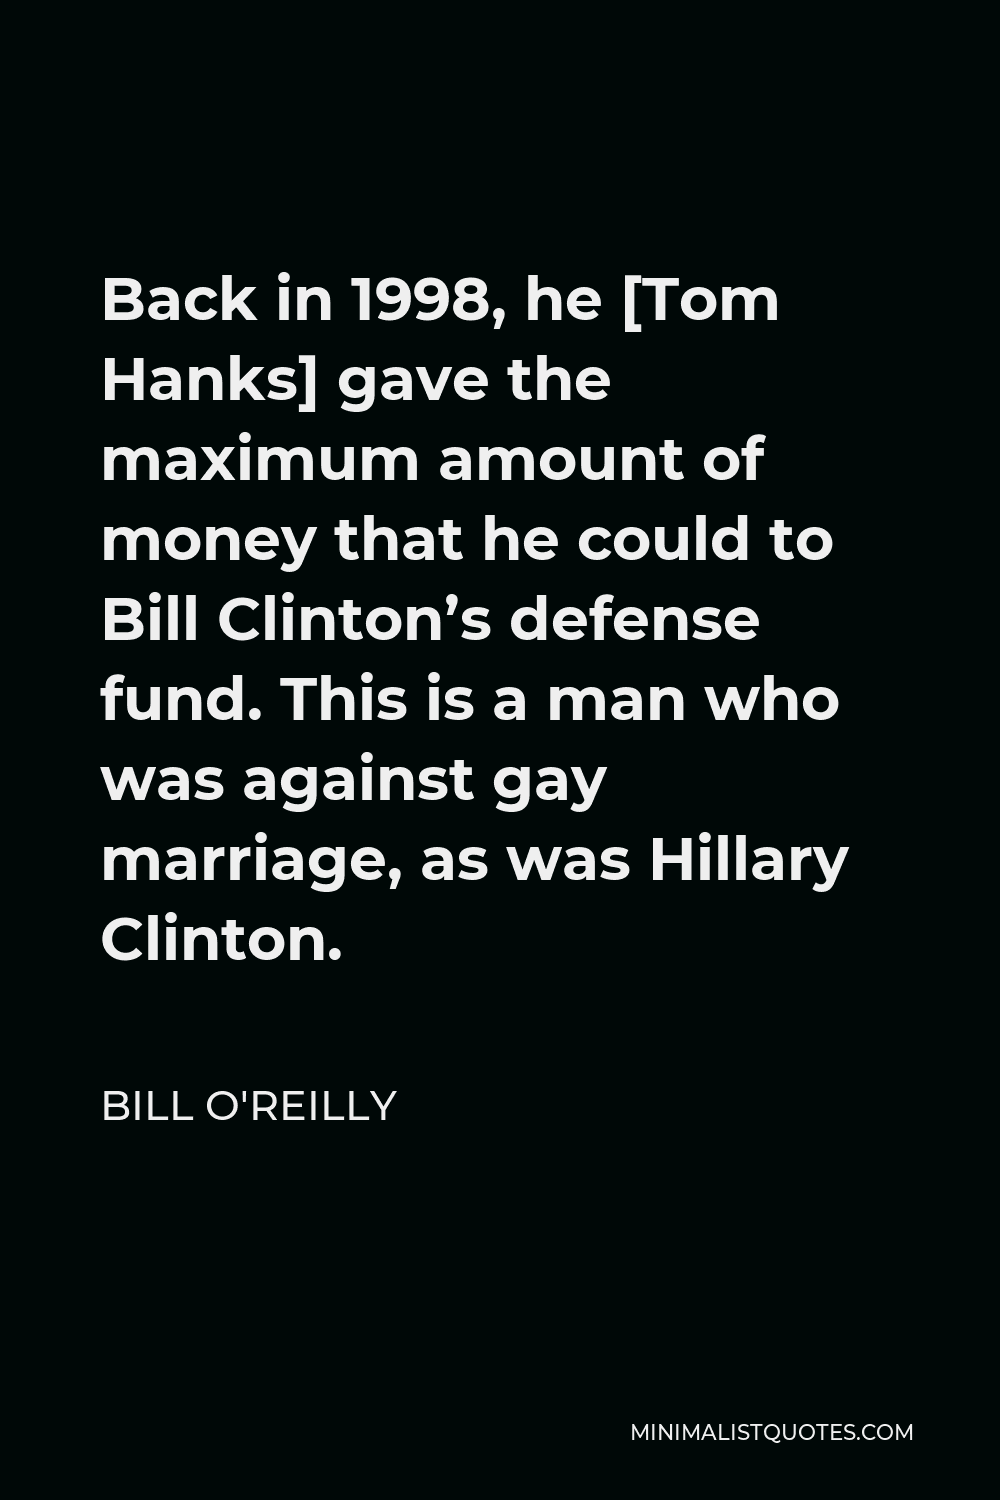 Bill O'Reilly Quote - Back in 1998, he [Tom Hanks] gave the maximum amount of money that he could to Bill Clinton’s defense fund. This is a man who was against gay marriage, as was Hillary Clinton.